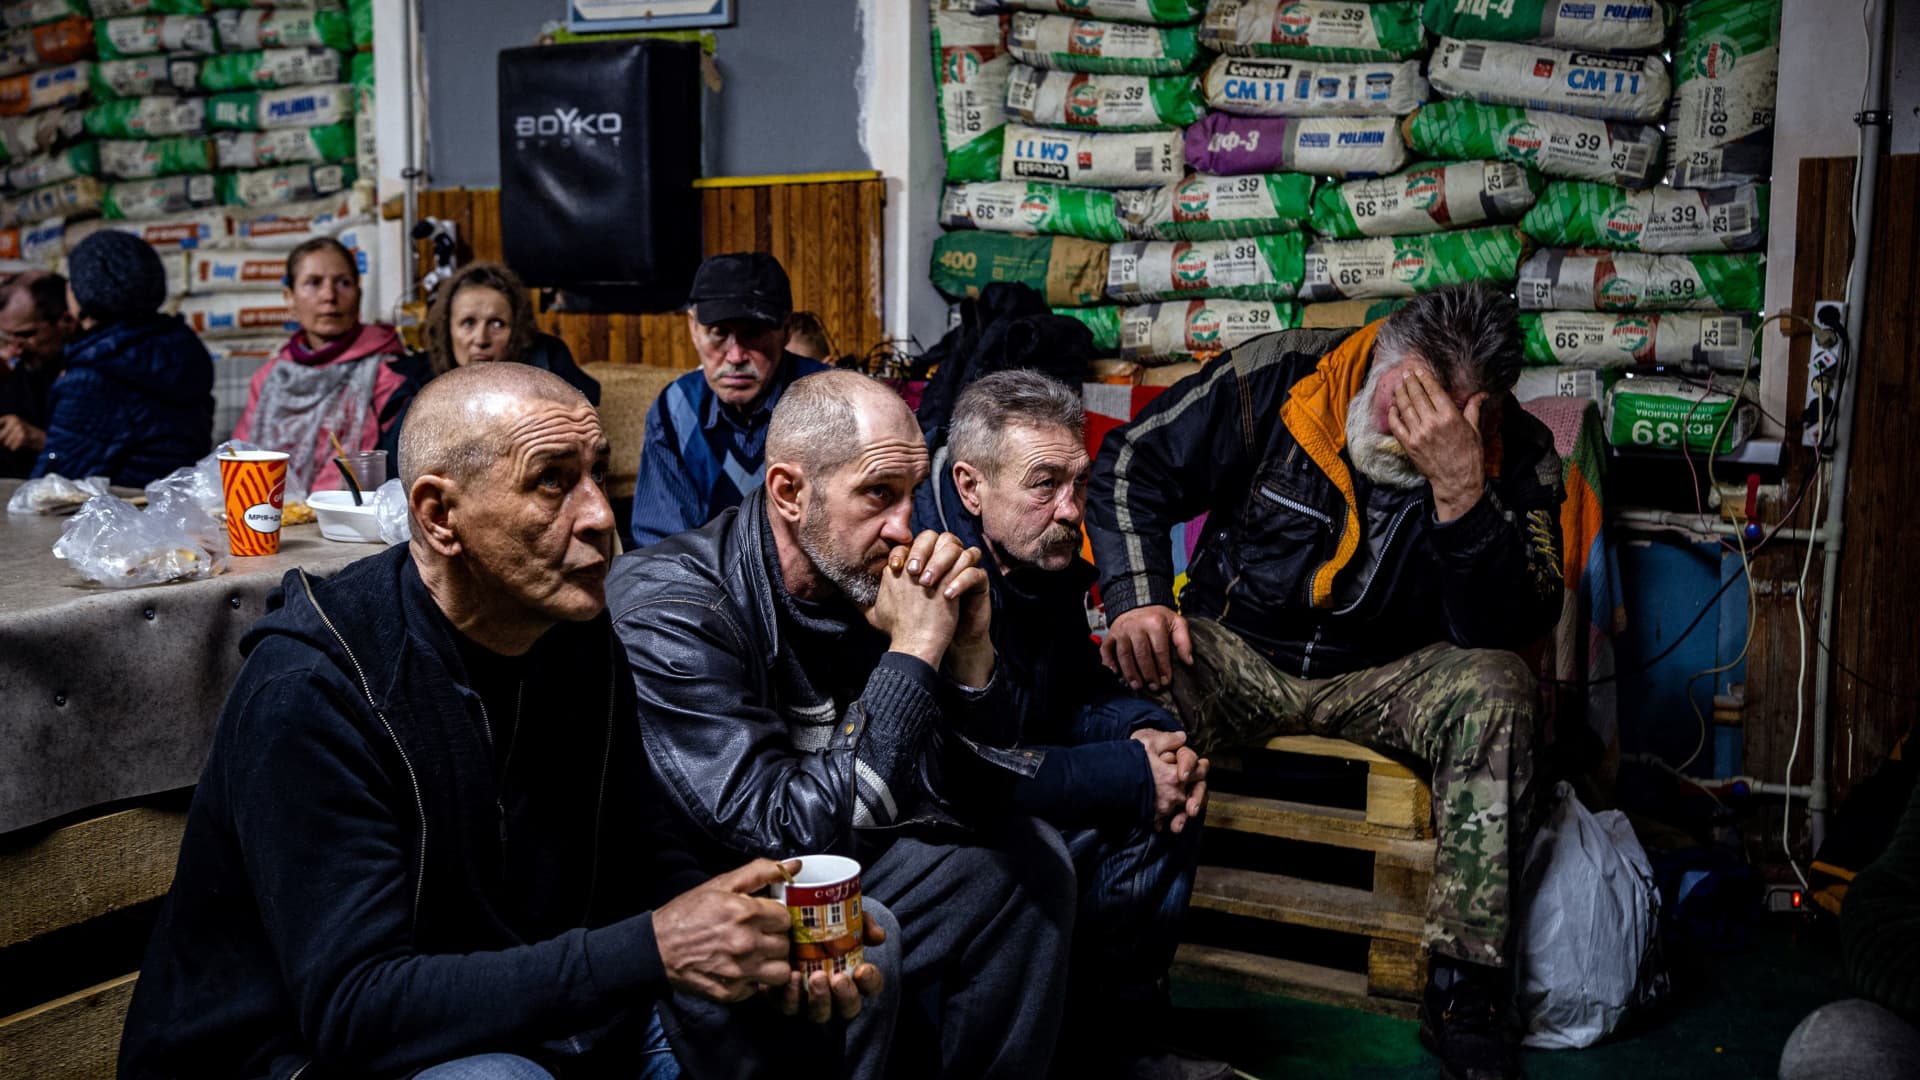 Ukrainians watching a movie on TV at a humanitarian aid center in Bakhmut on Feb. 27, 2023 amid the Russian invasion of Ukraine.